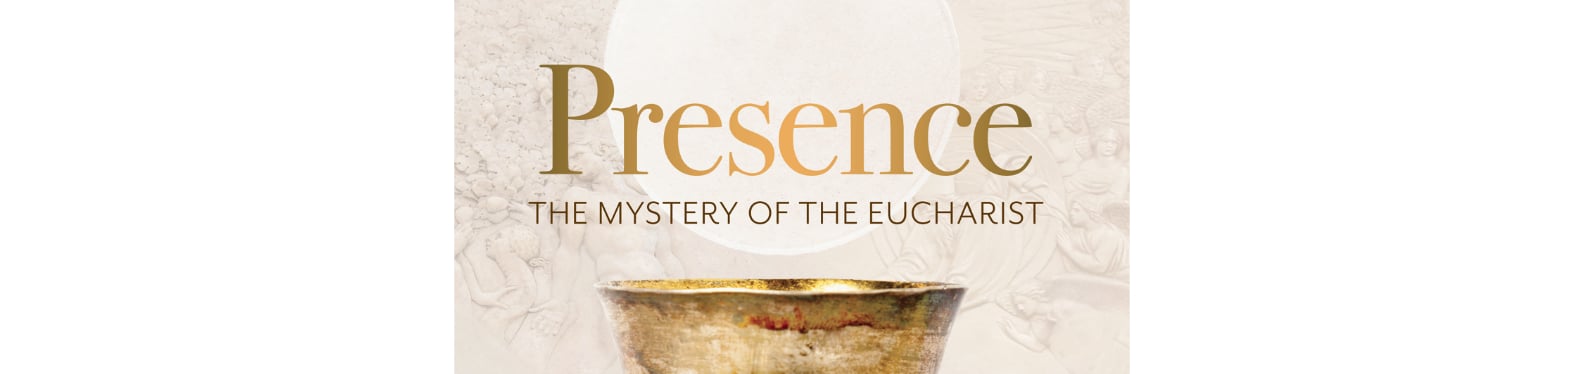 Presence - The Mystery of the Eucharist